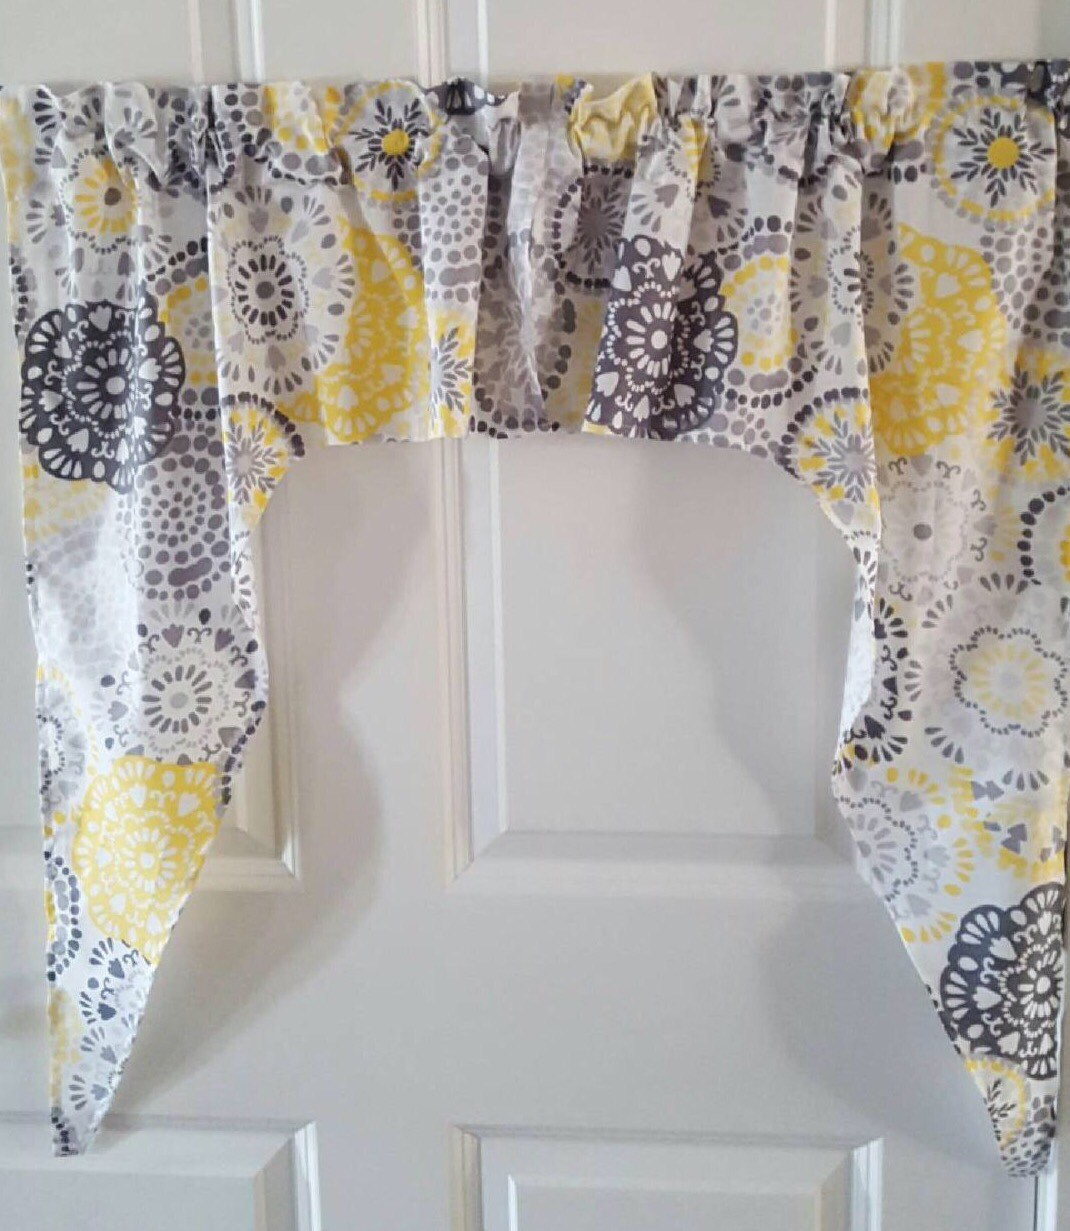 Yellow And Gray Kitchen Curtains
 Yellow and gray flower kitchen any room swag valance